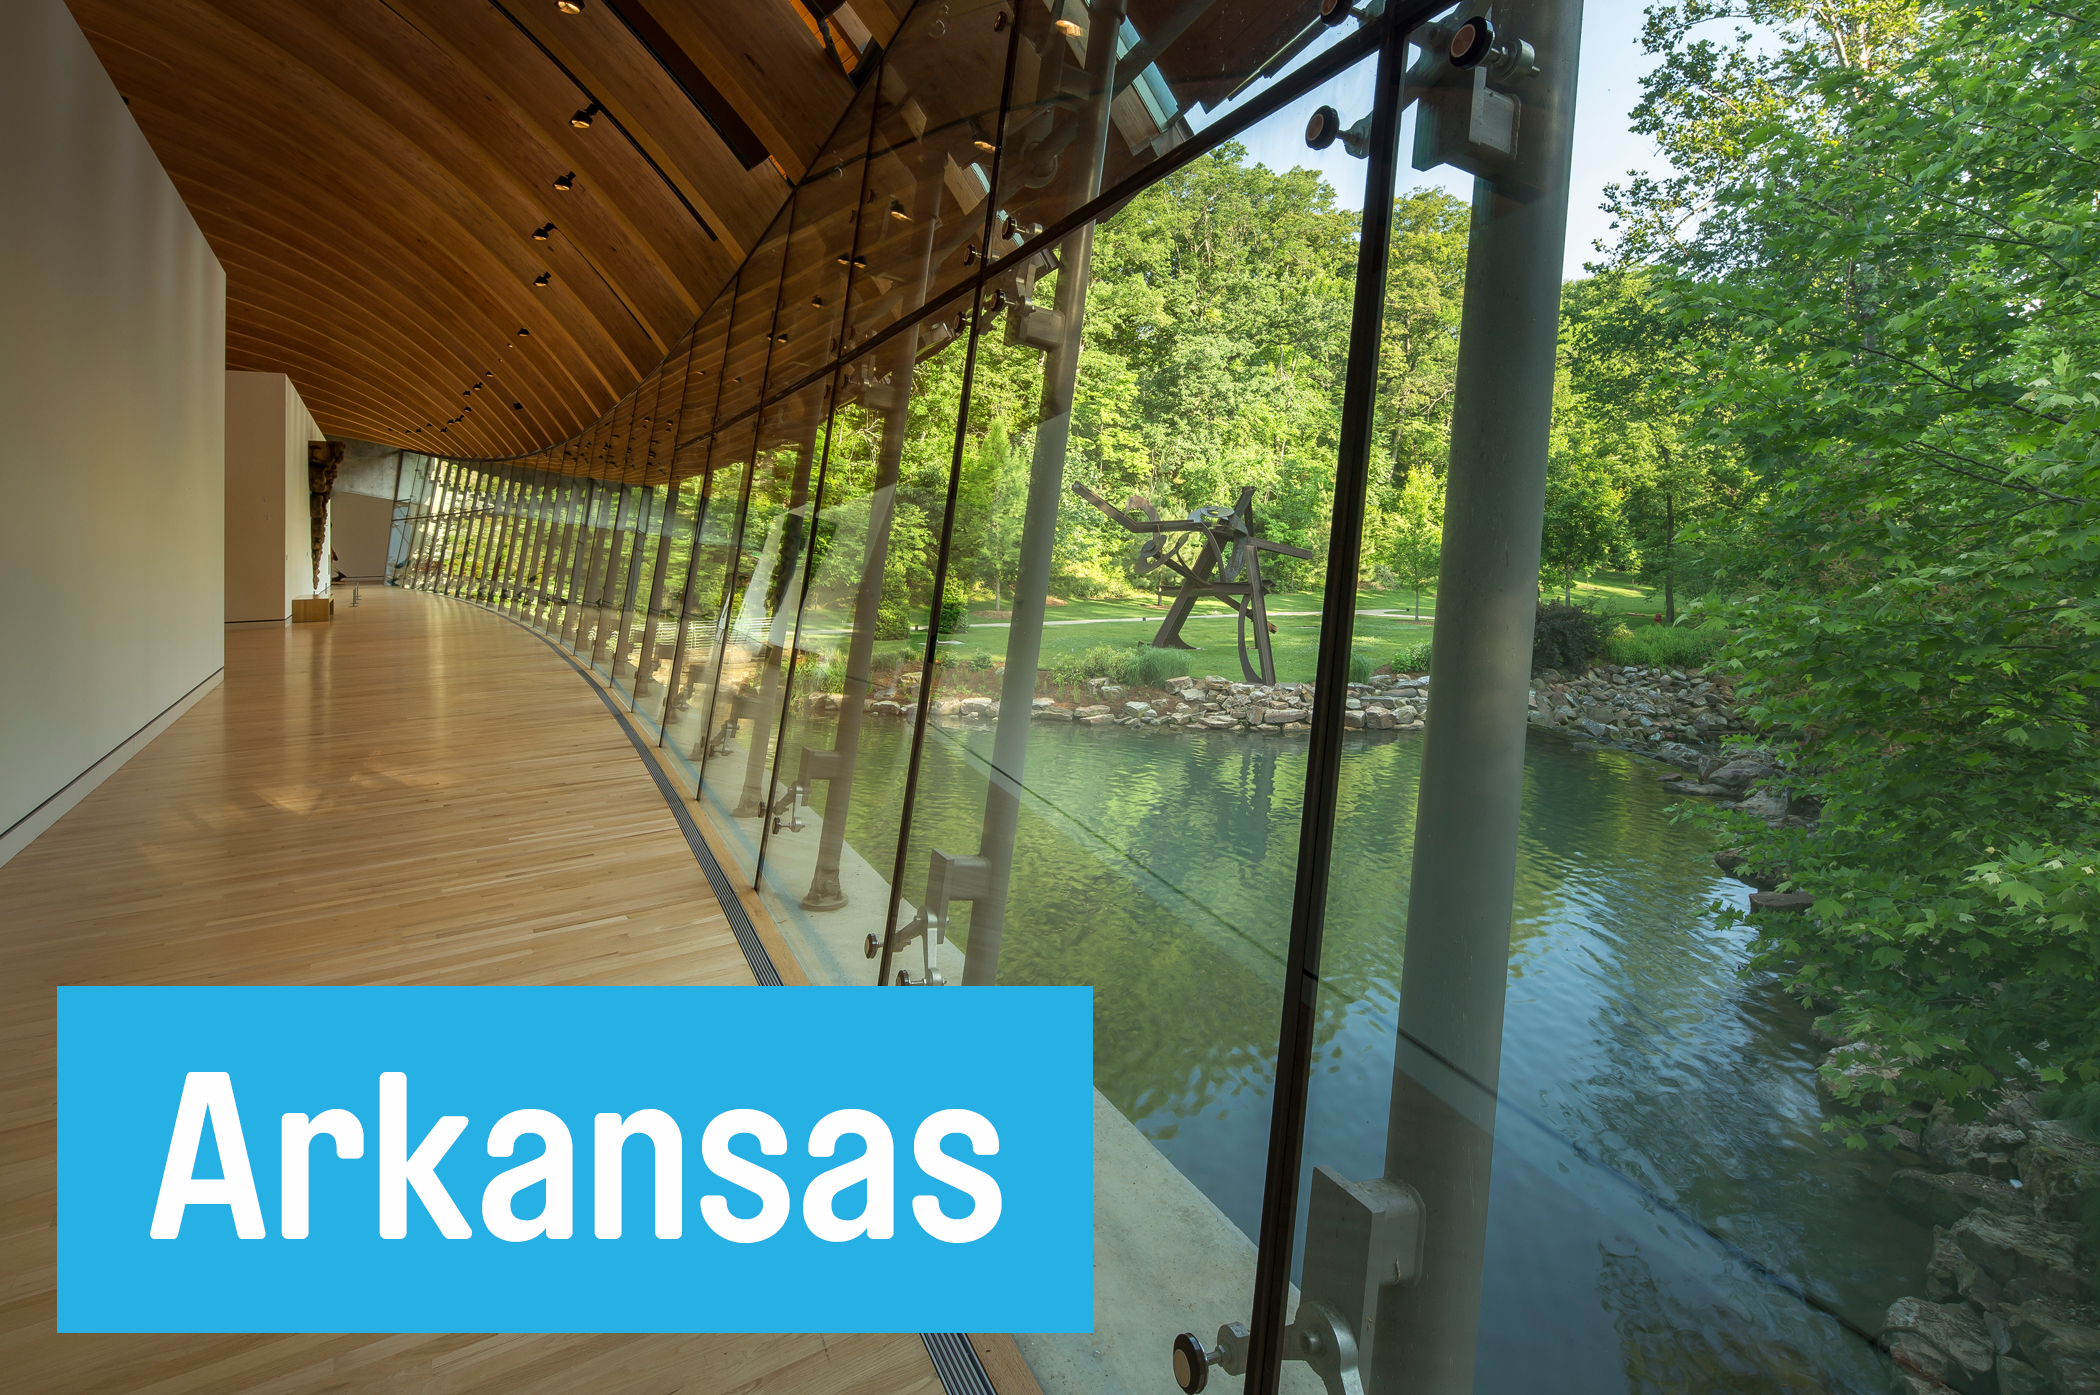 Gawk at works by Mary Cassatt, Mark Rothko, Andy Warhol, and five centuries of great American artists at the Moshe Safdie-designed <a href="http://crystalbridges.org/visit/" target="_blank">Crystal Bridges Museum</a> of Art. How can they afford to roll back the admission price to nothing? It was founded by Alice Walton, not far from the little family business in Bentonville: Walmart.